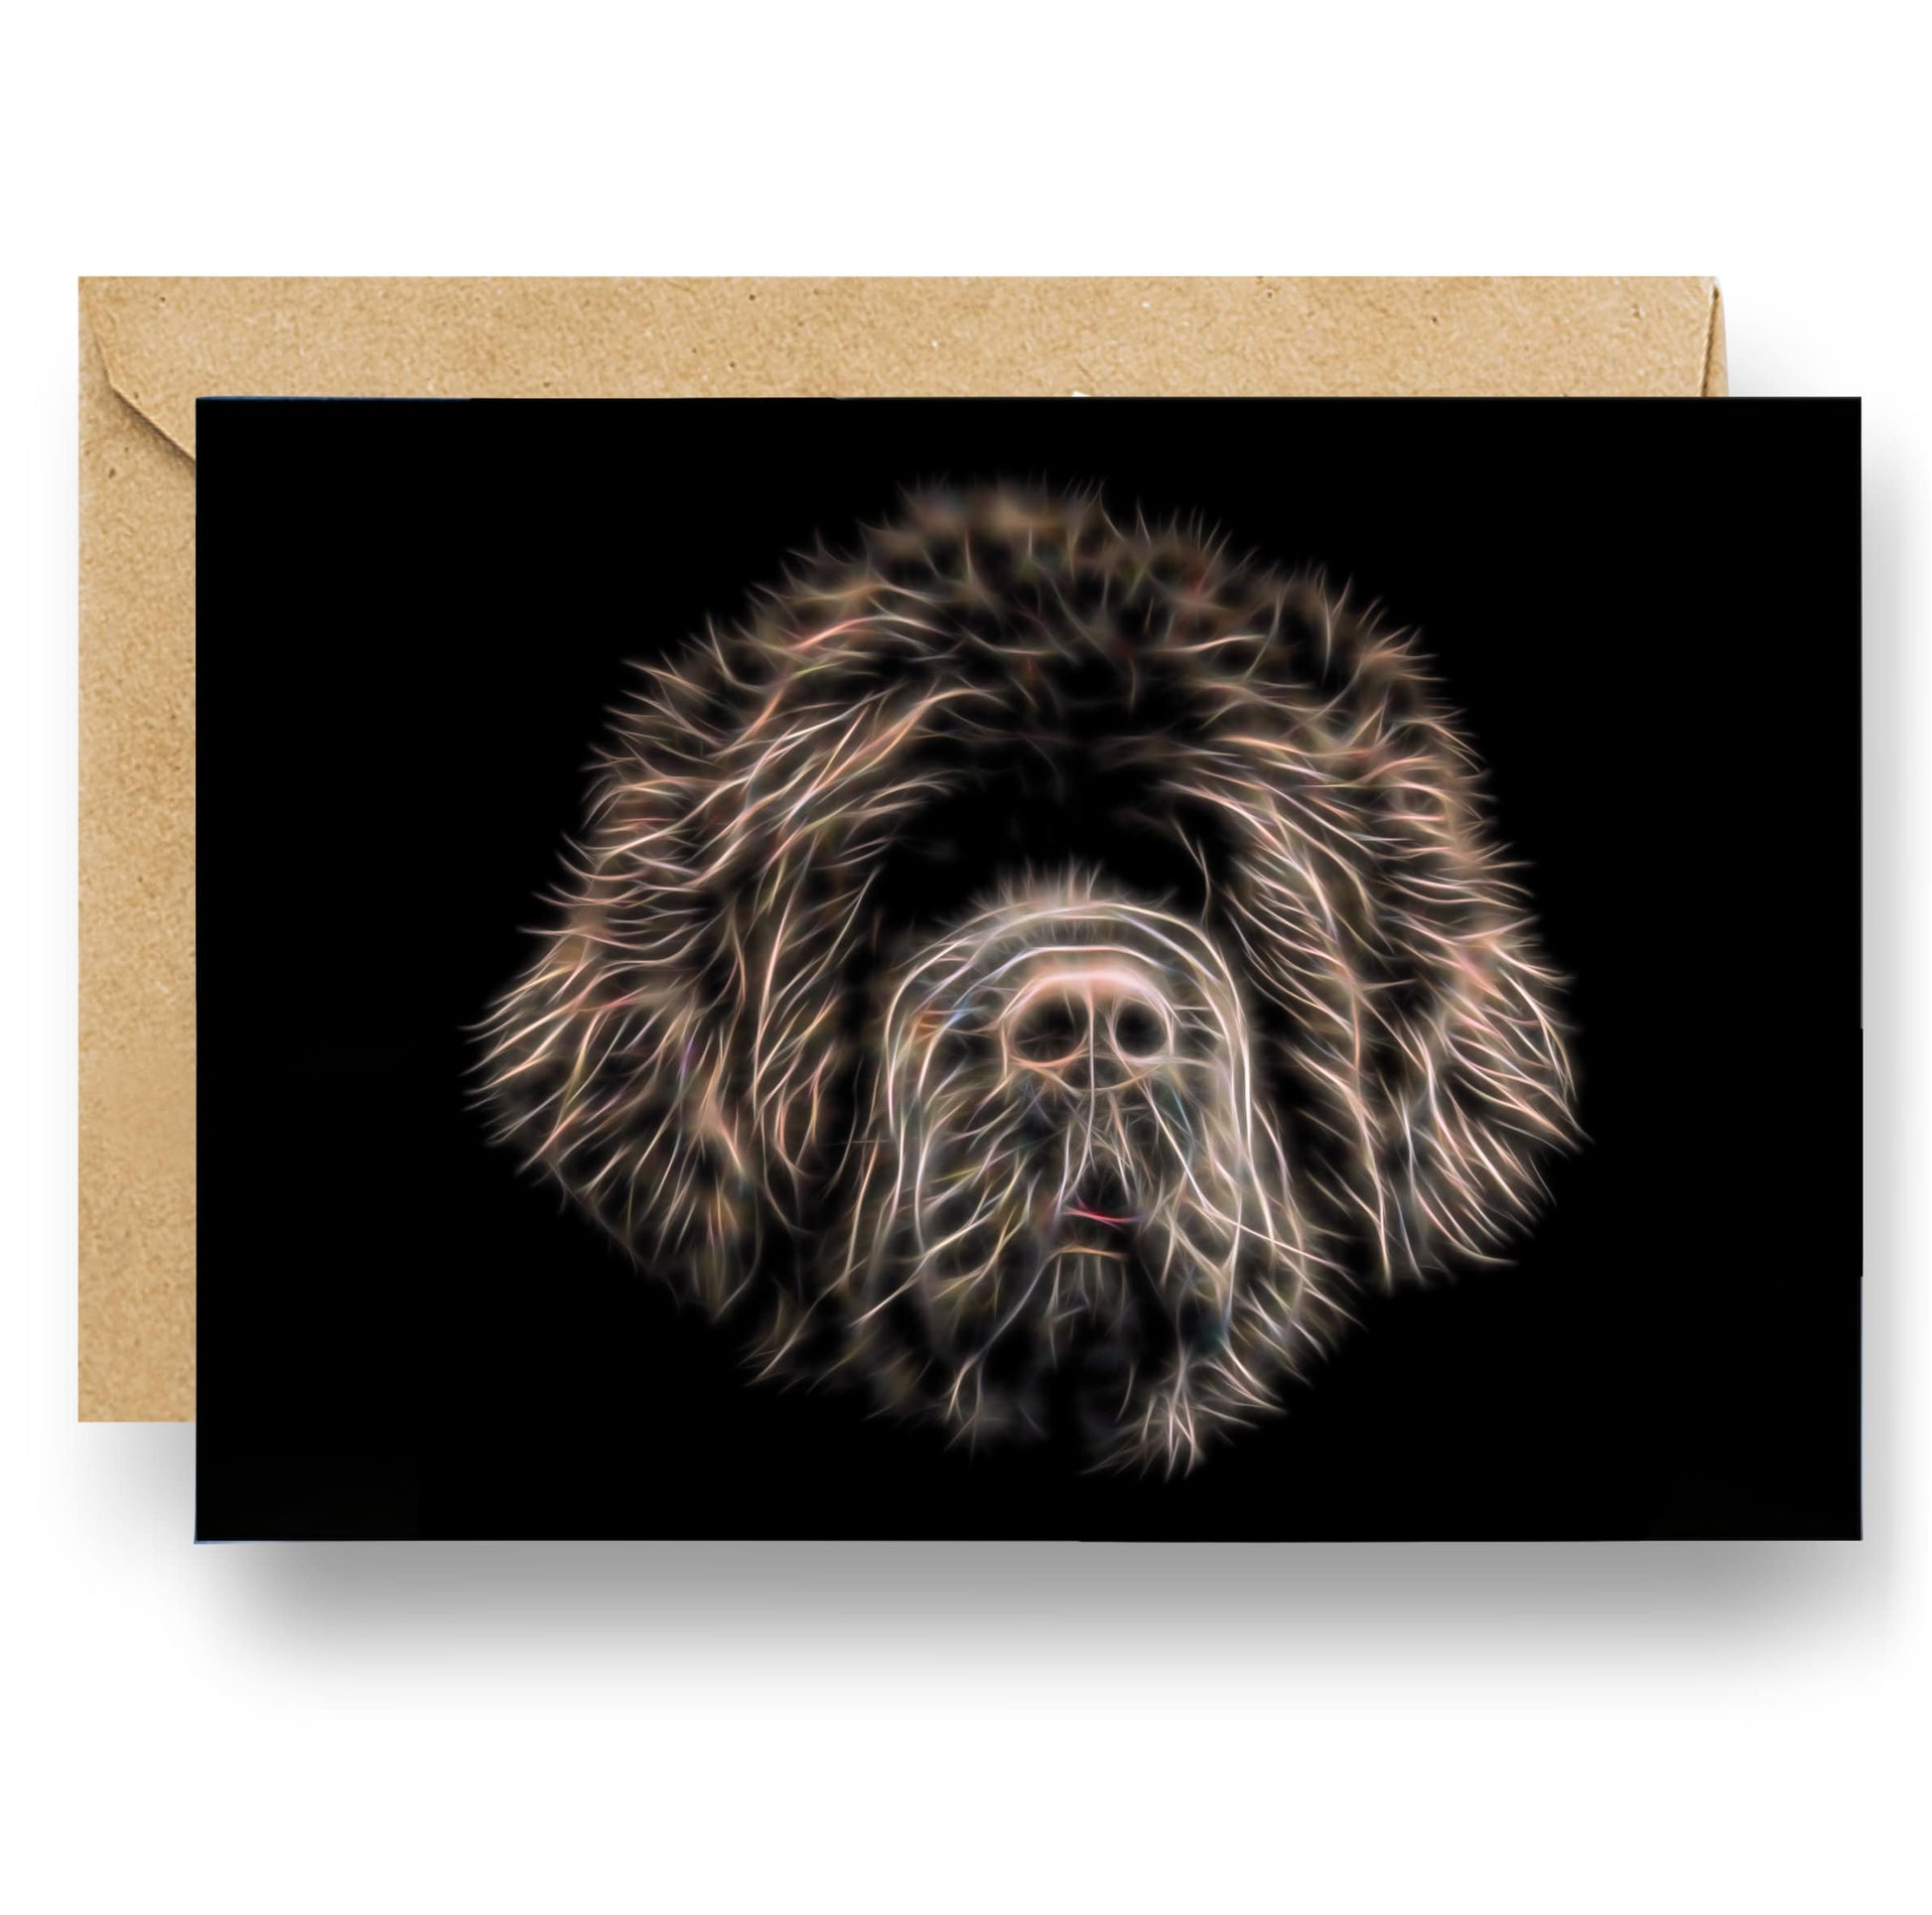 Chocolate Brown Newfoundland Greeting Card with Stunning Fractal Art Design. Blank Inside for Birthdays or any other Occasion